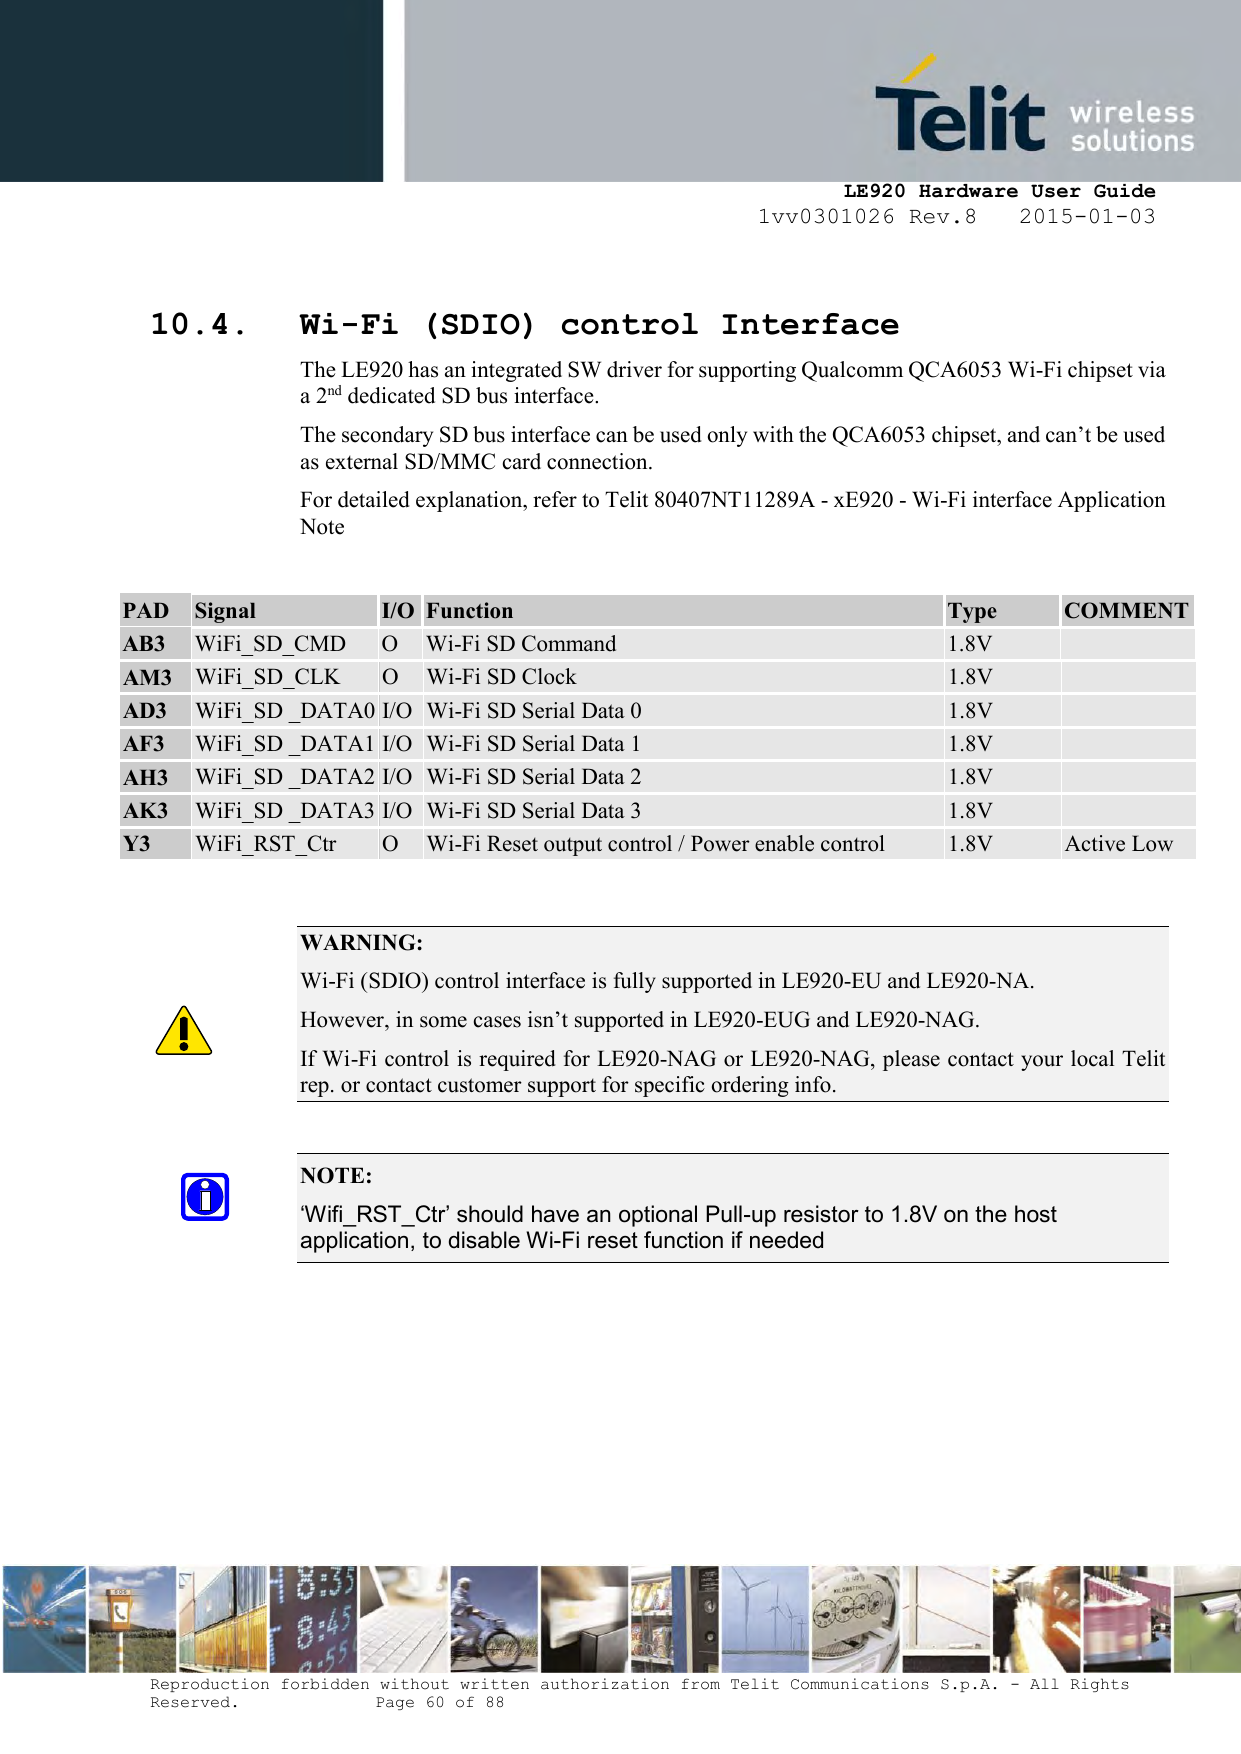     LE920 Hardware User Guide 1vv0301026 Rev.8   2015-01-03 Reproduction forbidden without written authorization from Telit Communications S.p.A. - All Rights Reserved.    Page 60 of 88   10.4. Wi-Fi (SDIO) control Interface  The LE920 has an integrated SW driver for supporting Qualcomm QCA6053 Wi-Fi chipset via a 2nd dedicated SD bus interface. The secondary SD bus interface can be used only with the QCA6053 chipset, and can’t be used as external SD/MMC card connection. For detailed explanation, refer to Telit 80407NT11289A - xE920 - Wi-Fi interface Application Note  PAD Signal I/O Function Type COMMENT AB3 WiFi_SD_CMD O Wi-Fi SD Command 1.8V   AM3 WiFi_SD_CLK O Wi-Fi SD Clock 1.8V   AD3 WiFi_SD _DATA0 I/O Wi-Fi SD Serial Data 0 1.8V   AF3 WiFi_SD _DATA1 I/O Wi-Fi SD Serial Data 1 1.8V   AH3 WiFi_SD _DATA2 I/O Wi-Fi SD Serial Data 2 1.8V   AK3 WiFi_SD _DATA3 I/O Wi-Fi SD Serial Data 3 1.8V   Y3 WiFi_RST_Ctr O Wi-Fi Reset output control / Power enable control 1.8V Active Low    WARNING: Wi-Fi (SDIO) control interface is fully supported in LE920-EU and LE920-NA. However, in some cases isn’t supported in LE920-EUG and LE920-NAG. If Wi-Fi control is required for LE920-NAG or LE920-NAG, please contact your local Telit rep. or contact customer support for specific ordering info.   NOTE:  ‘Wifi_RST_Ctr’ should have an optional Pull-up resistor to 1.8V on the host application, to disable Wi-Fi reset function if needed   